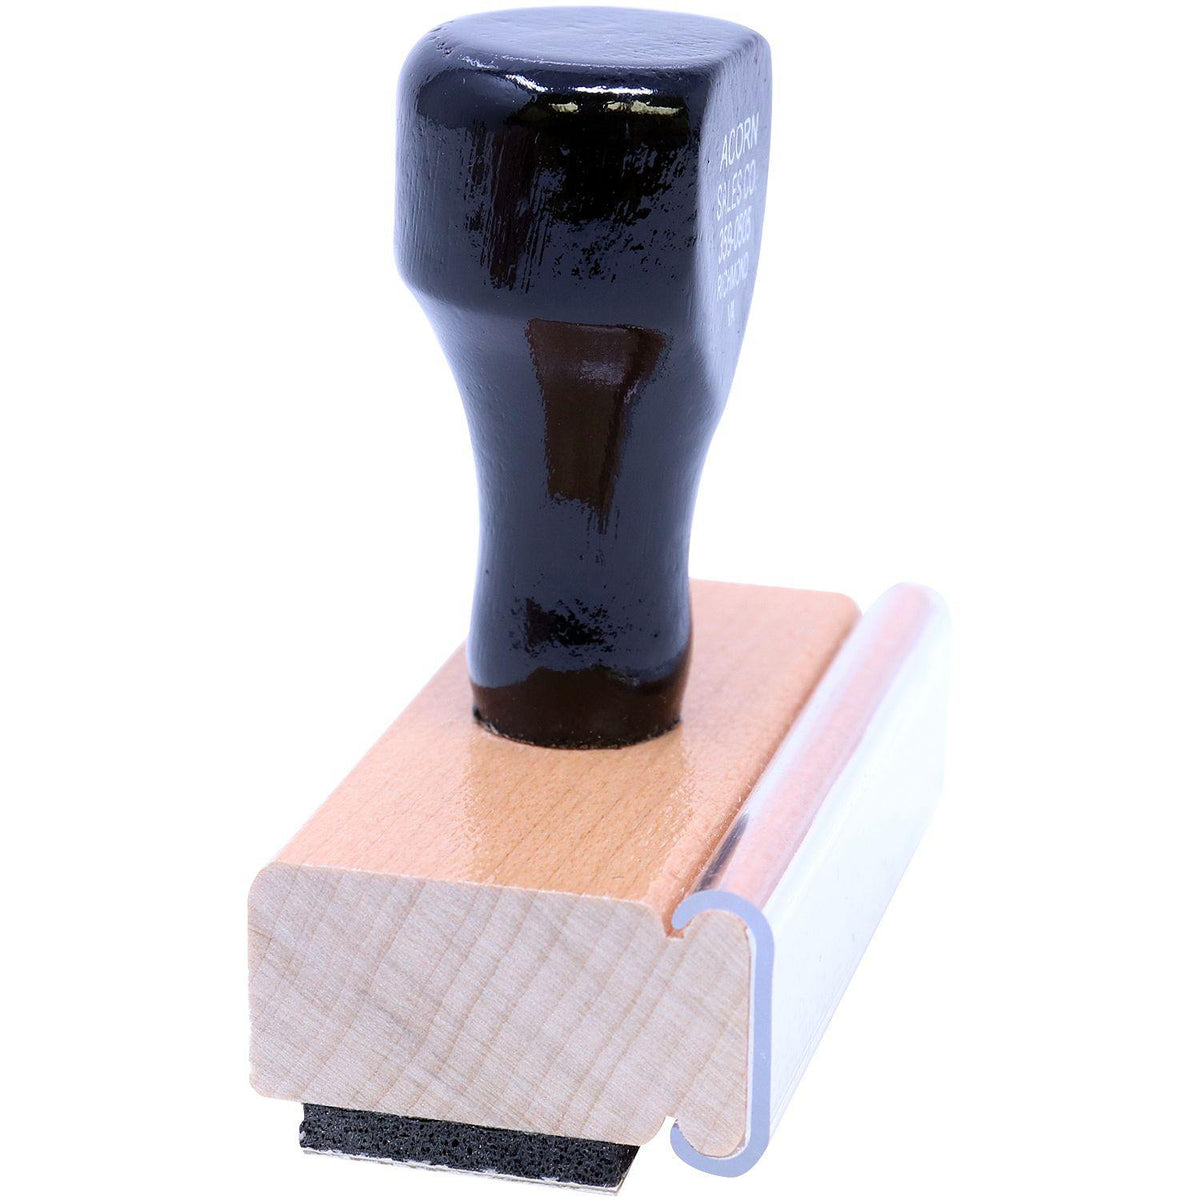 Library Mail Rubber Stamp - Engineer Seal Stamps - Brand_Acorn, Impression Size_Small, Stamp Type_Regular Stamp, Type of Use_General, Type of Use_Postal &amp; Mailing